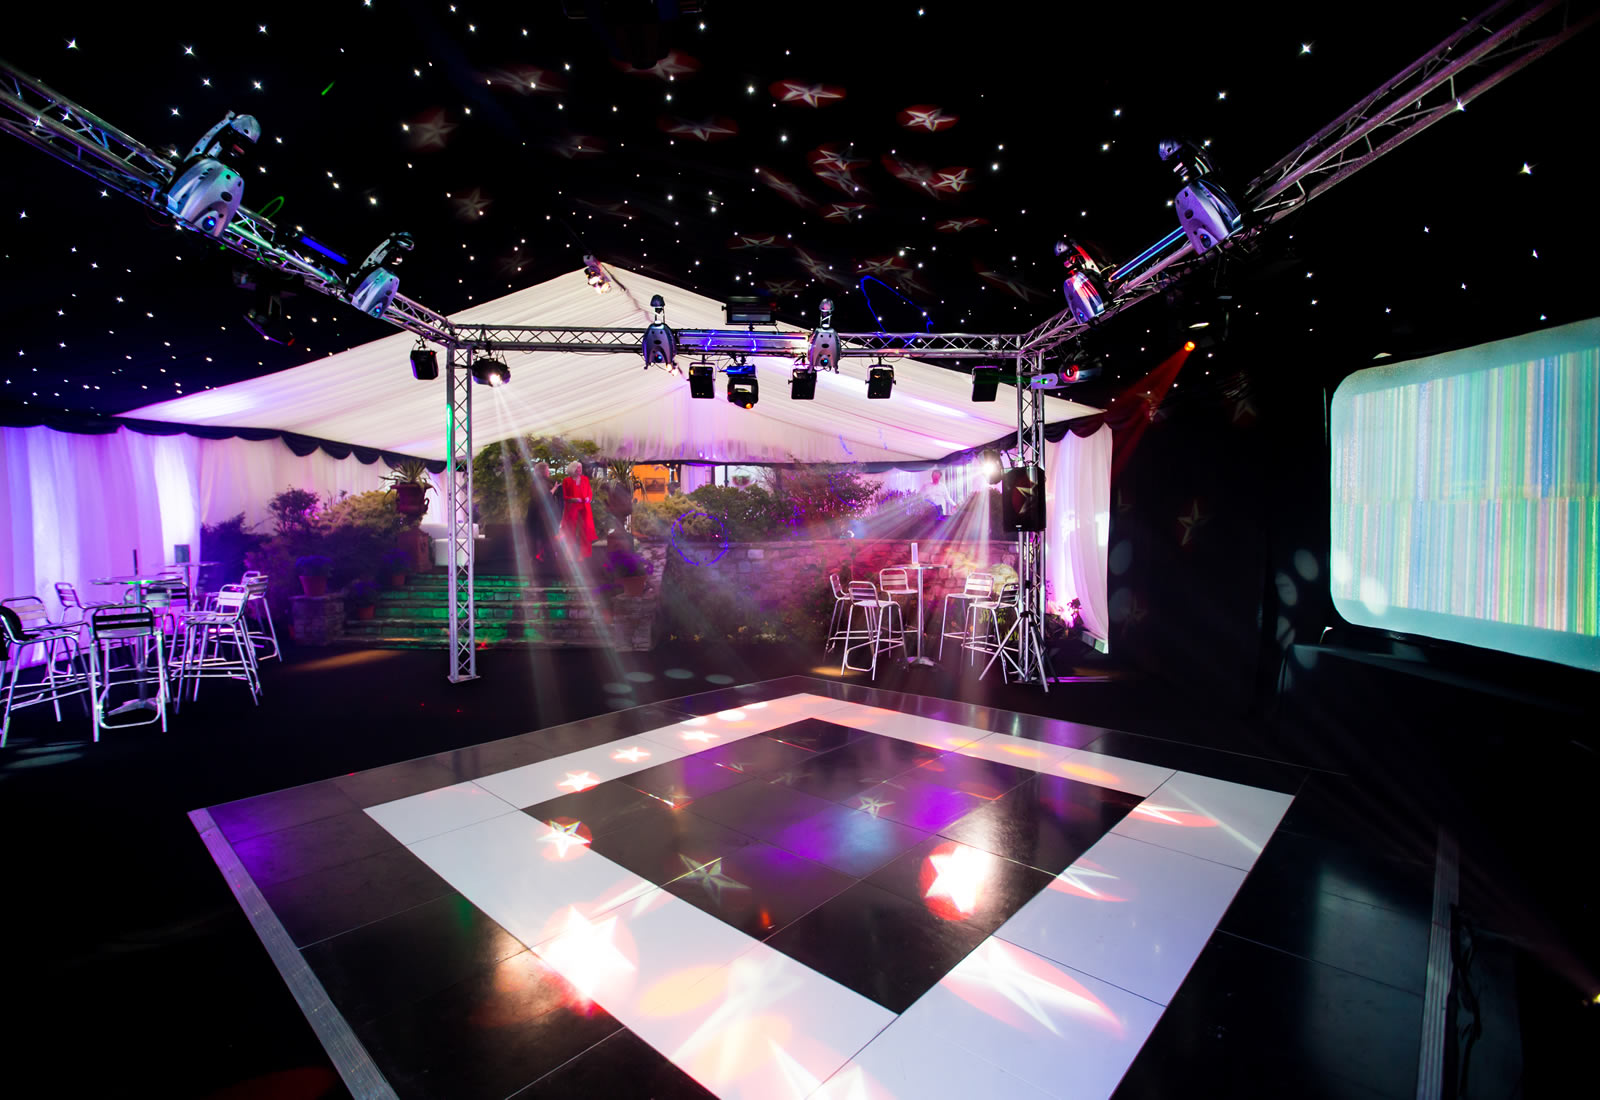 Square dance floor with lighting rig